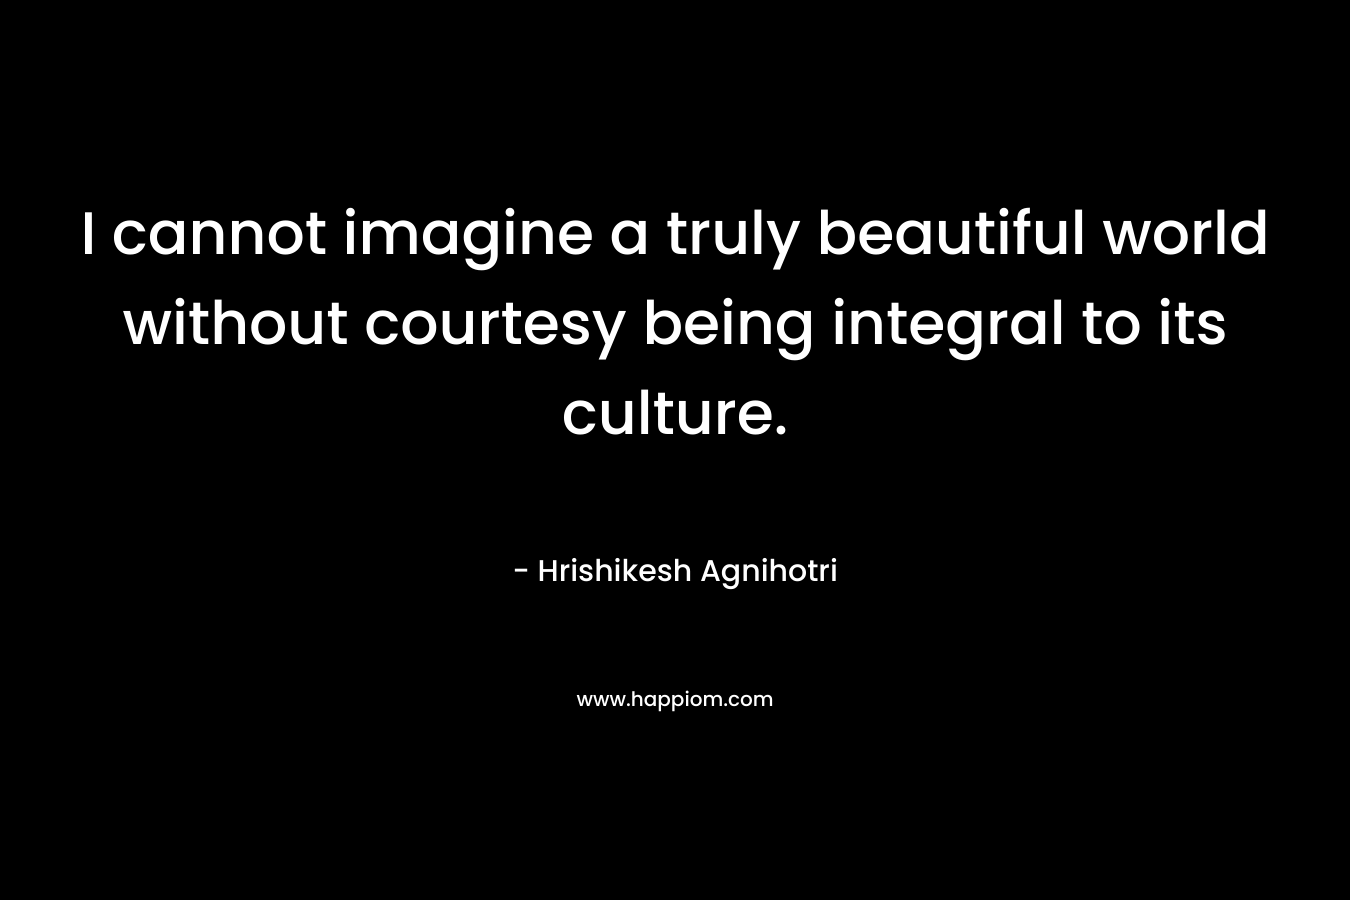 I cannot imagine a truly beautiful world without courtesy being integral to its culture. – Hrishikesh Agnihotri